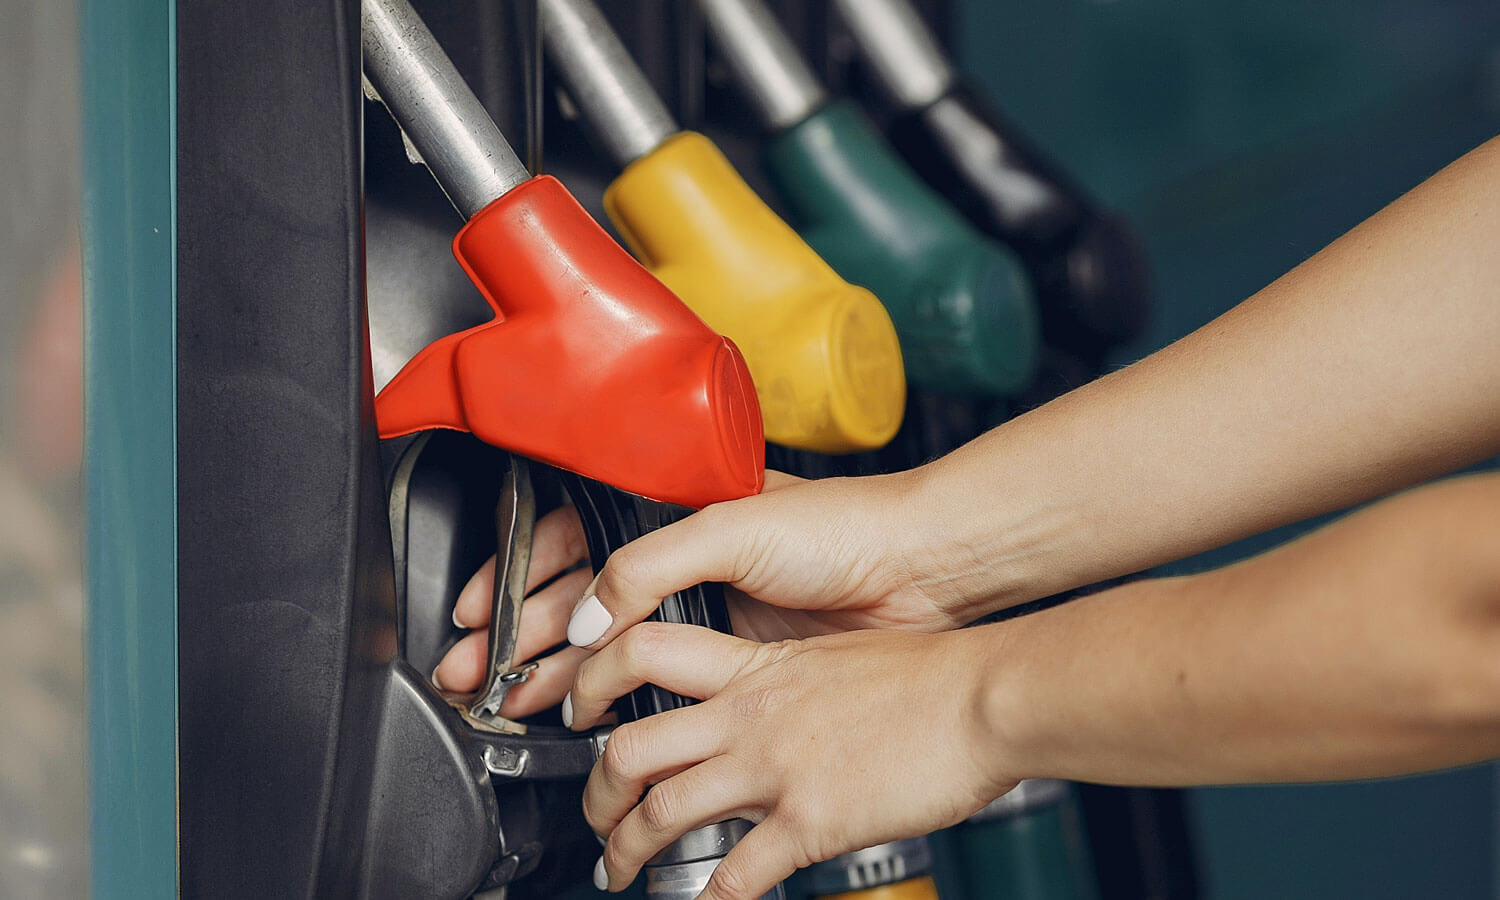 A pair of hands reaching for the gas pump at a station